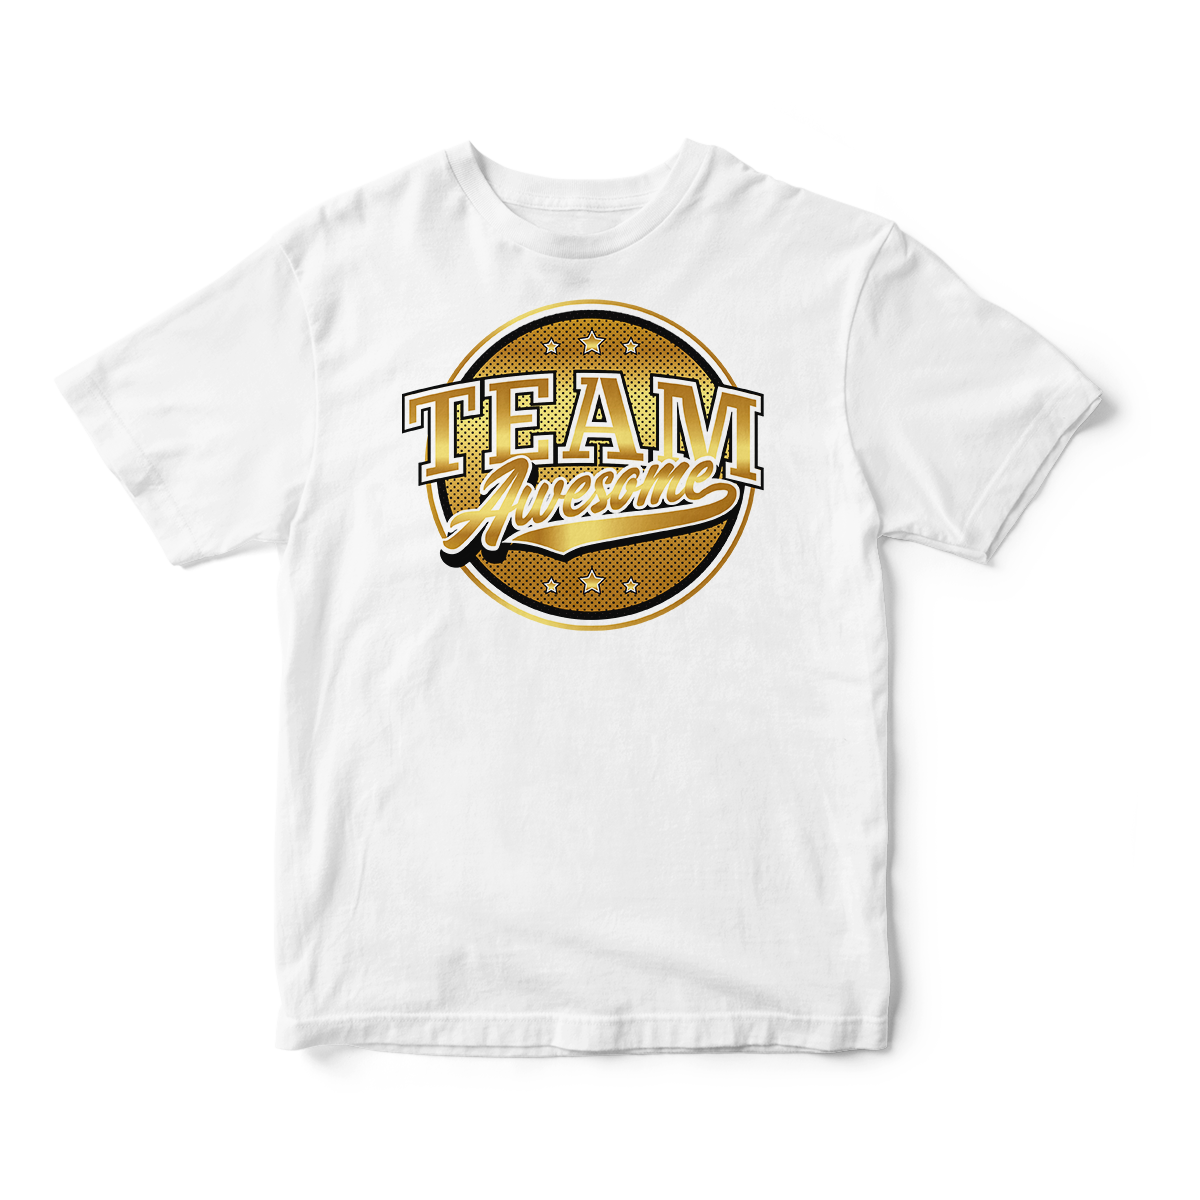 Team Awesome in Gold Short Sleeve Tee